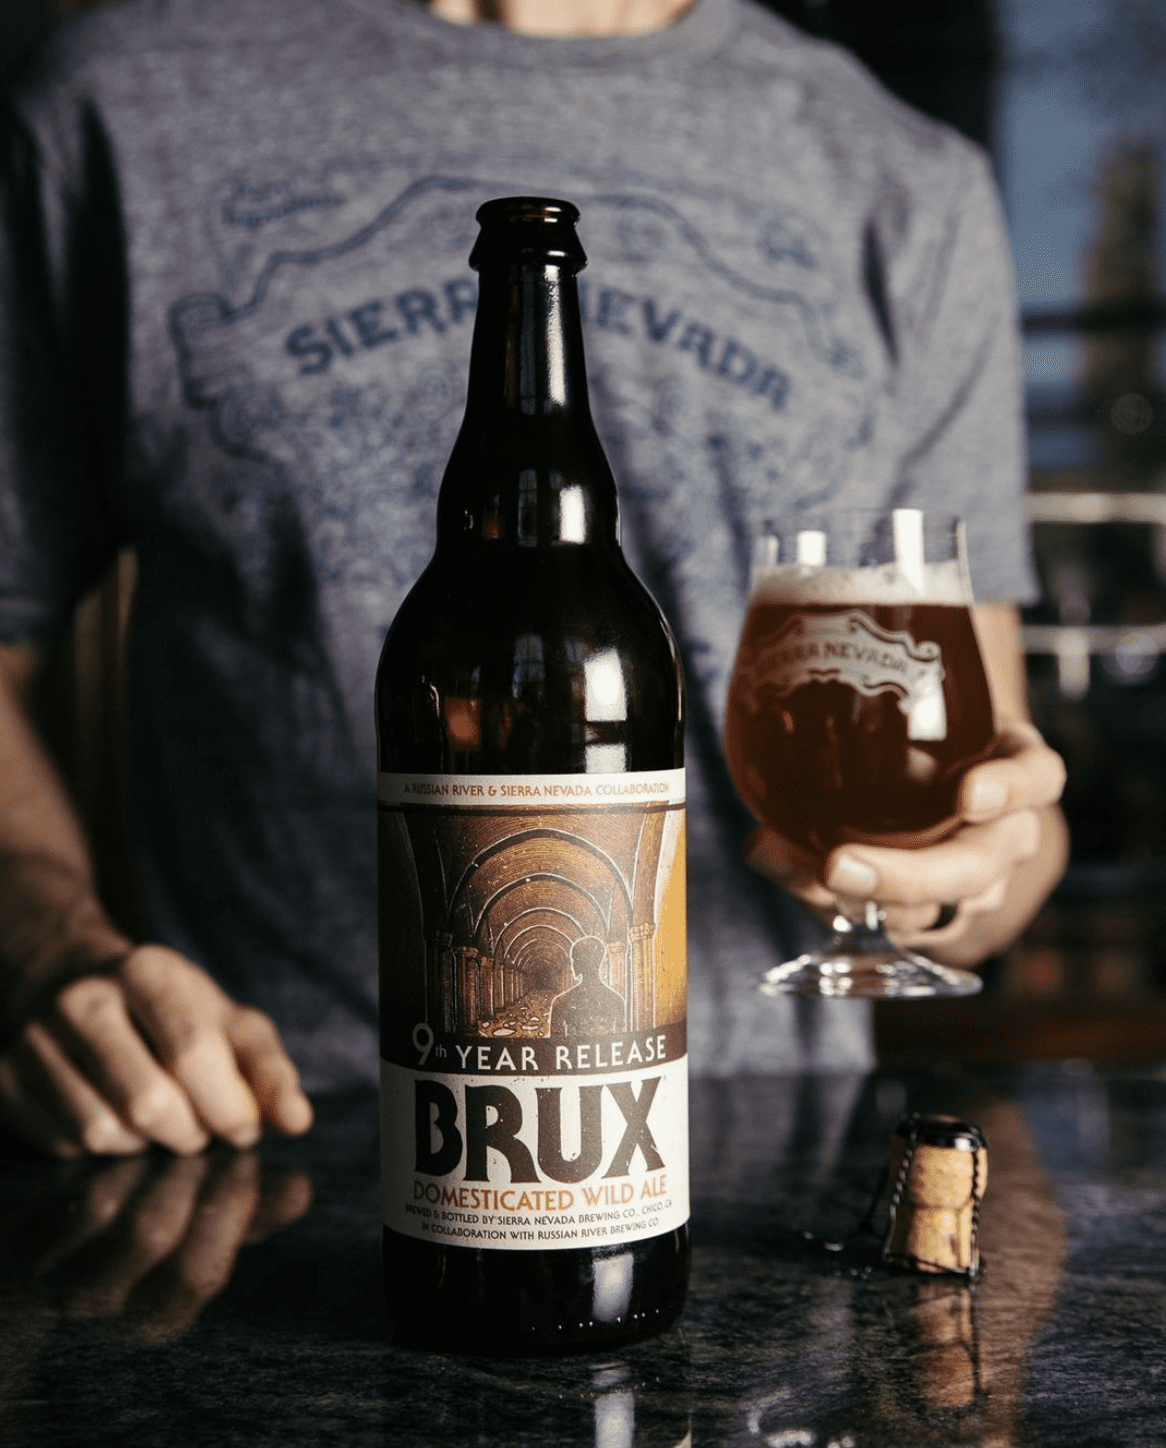 A bottle of Brux sits on a bar in front of a man, alongside a freshly poured pint